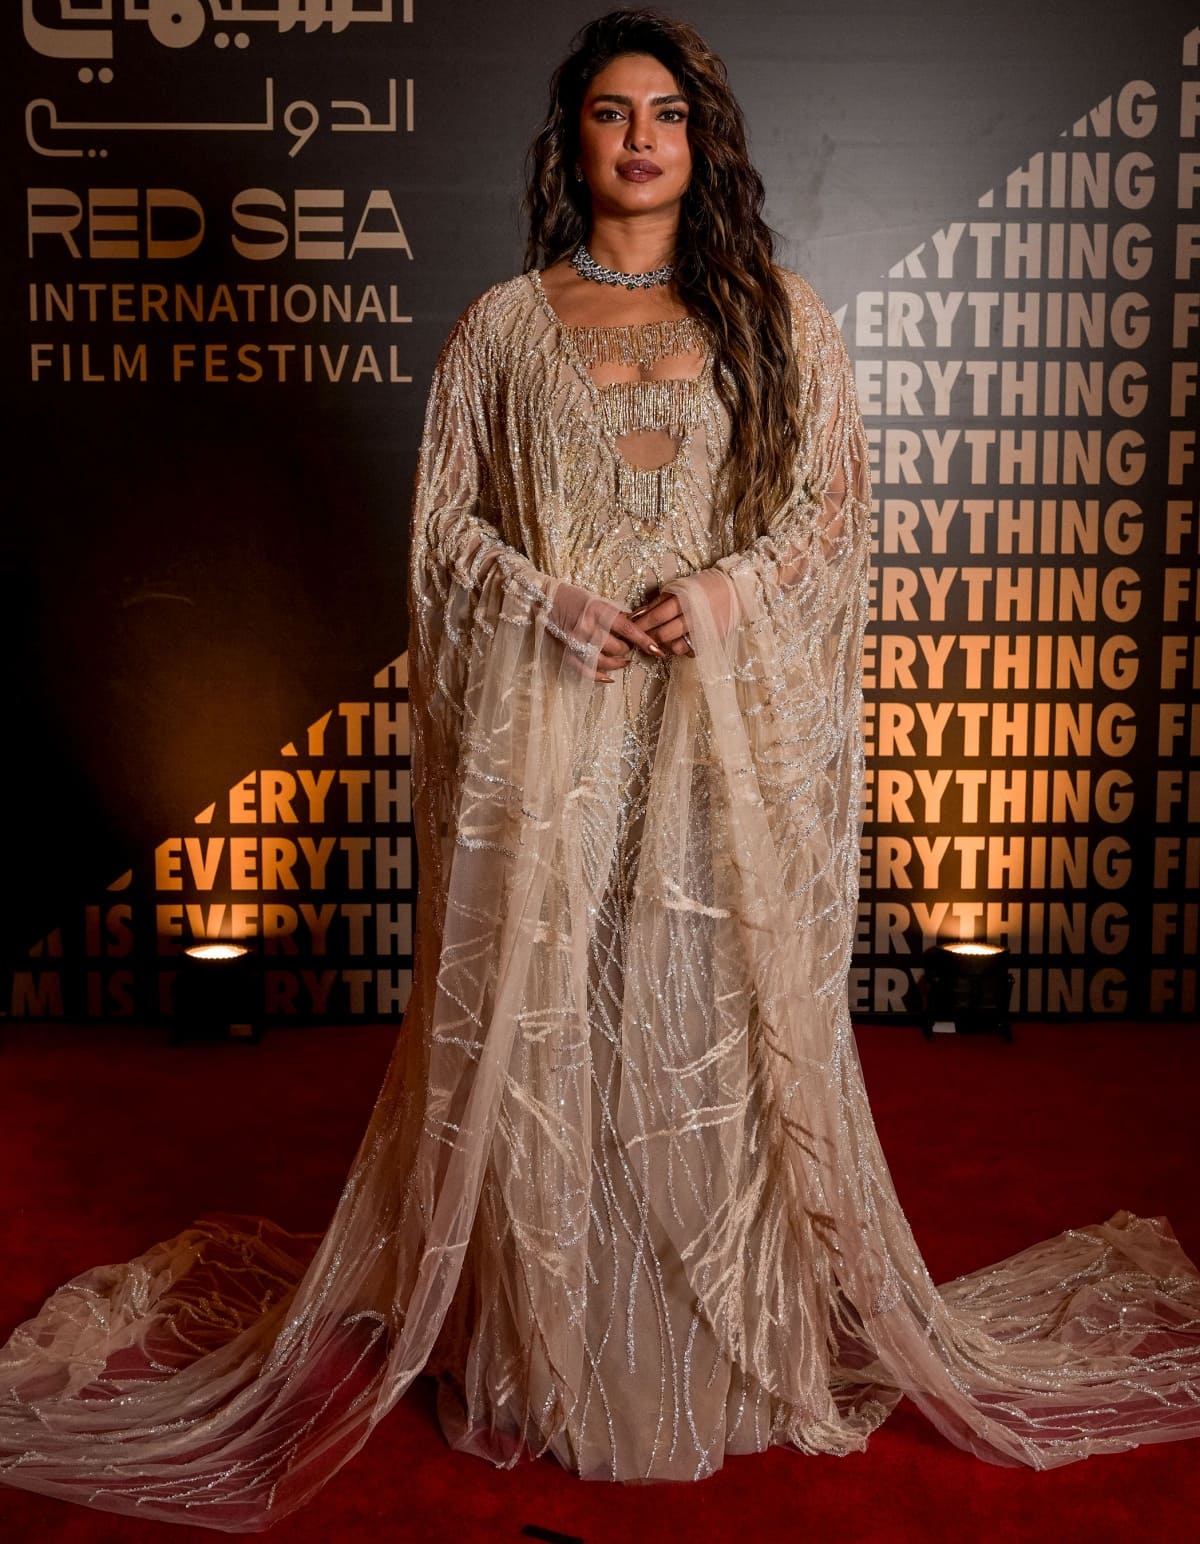 Priyanka Chopra Jonas making a stunning entrance at the red carpet opening ceremony of the 2nd Red Sea Film Festival